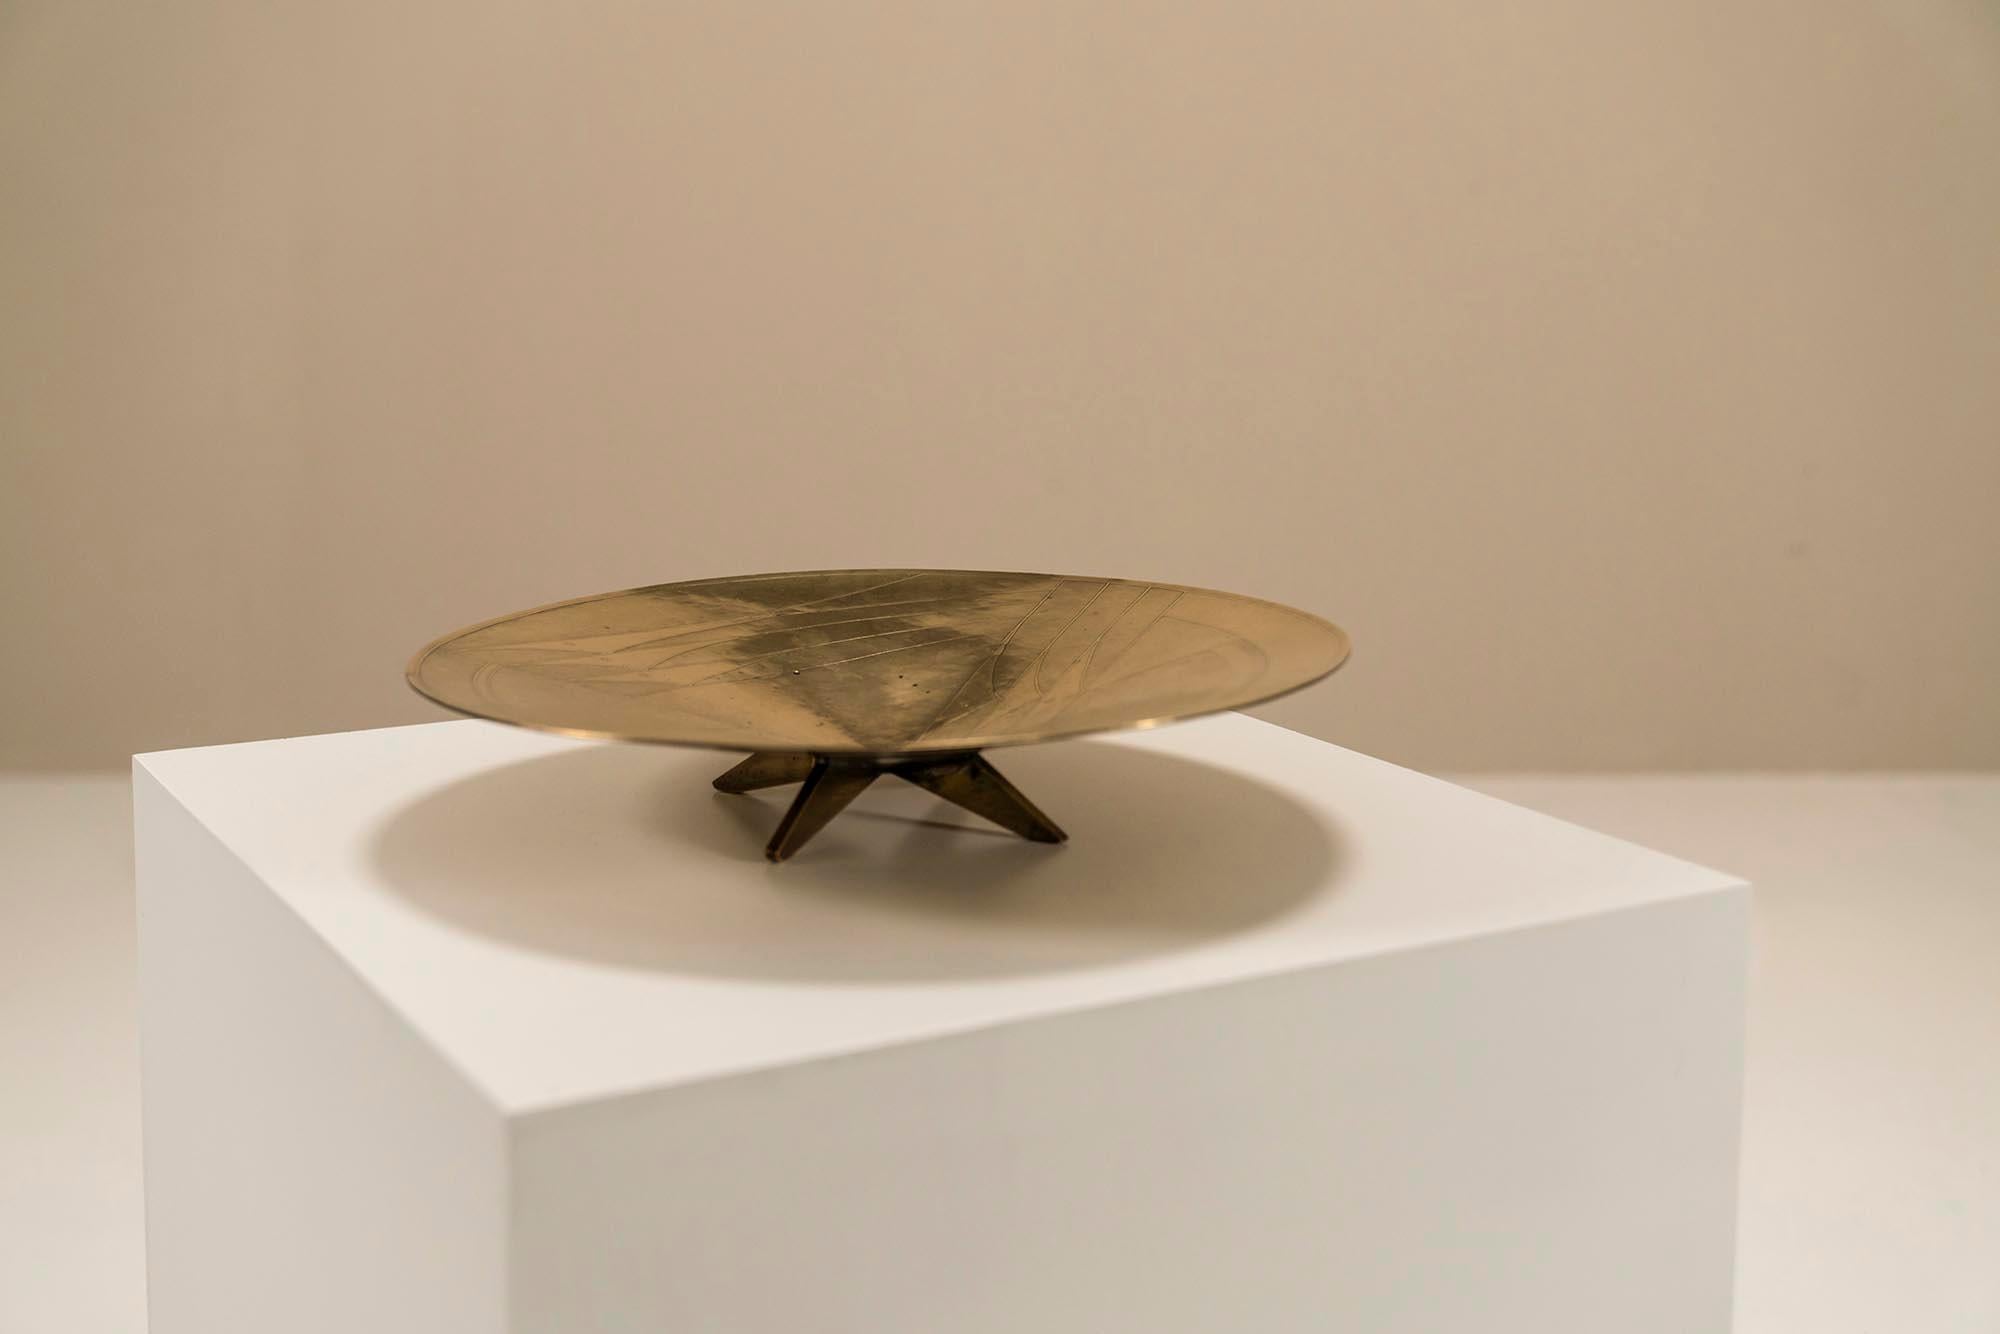 Mid-20th Century Abstract Decorated Bowl in Hammered Brass by Cris Agterberg, Netherlands 1934